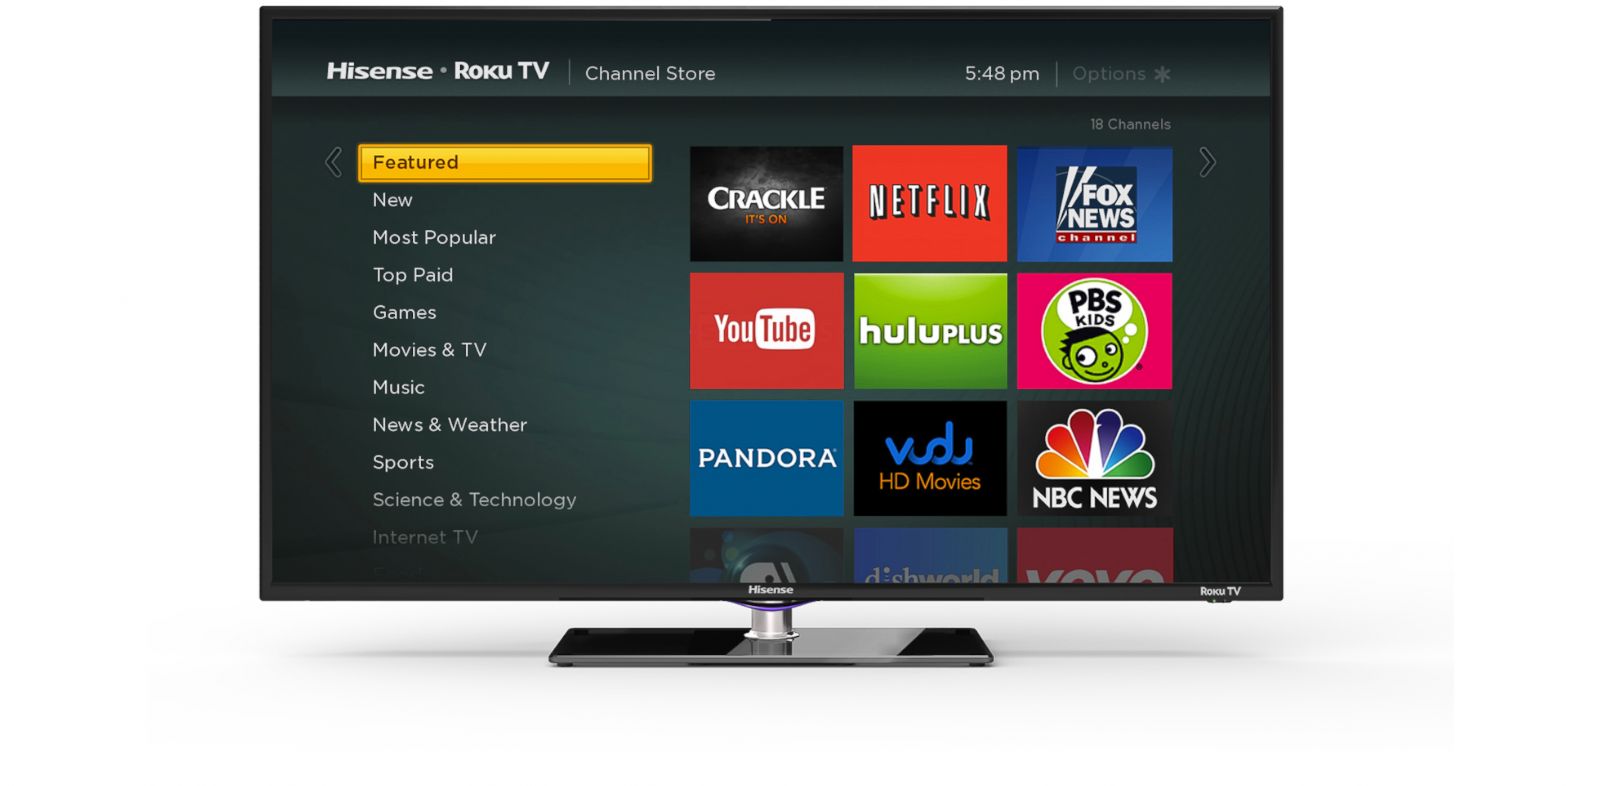 roku box own channels without thinks tvs call rokutv outside its abc allow customers